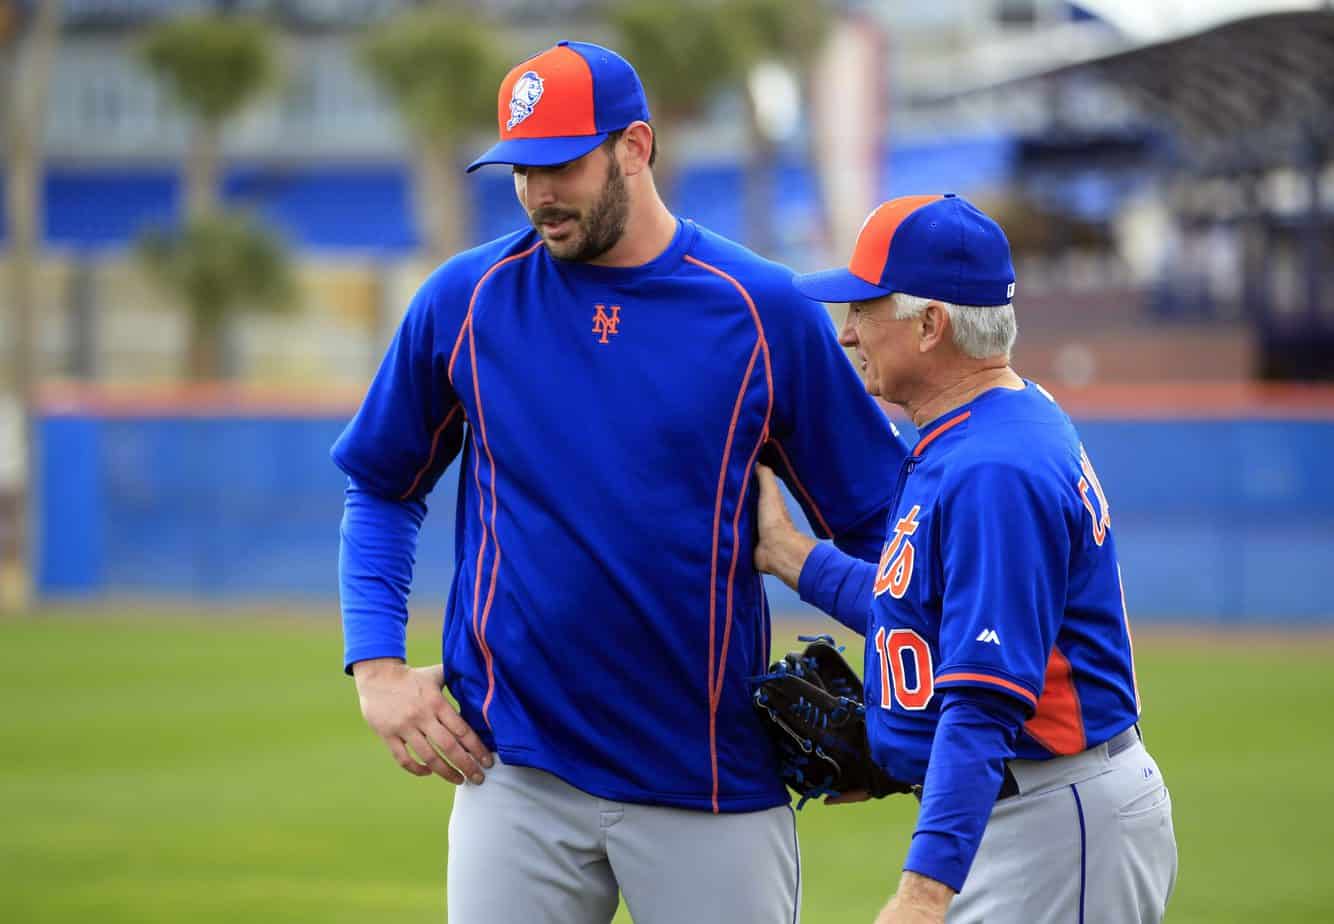 Former New York Mets manager Terry Collins had some telling comments when asked about Matt Harvey's recent cocaine revelation